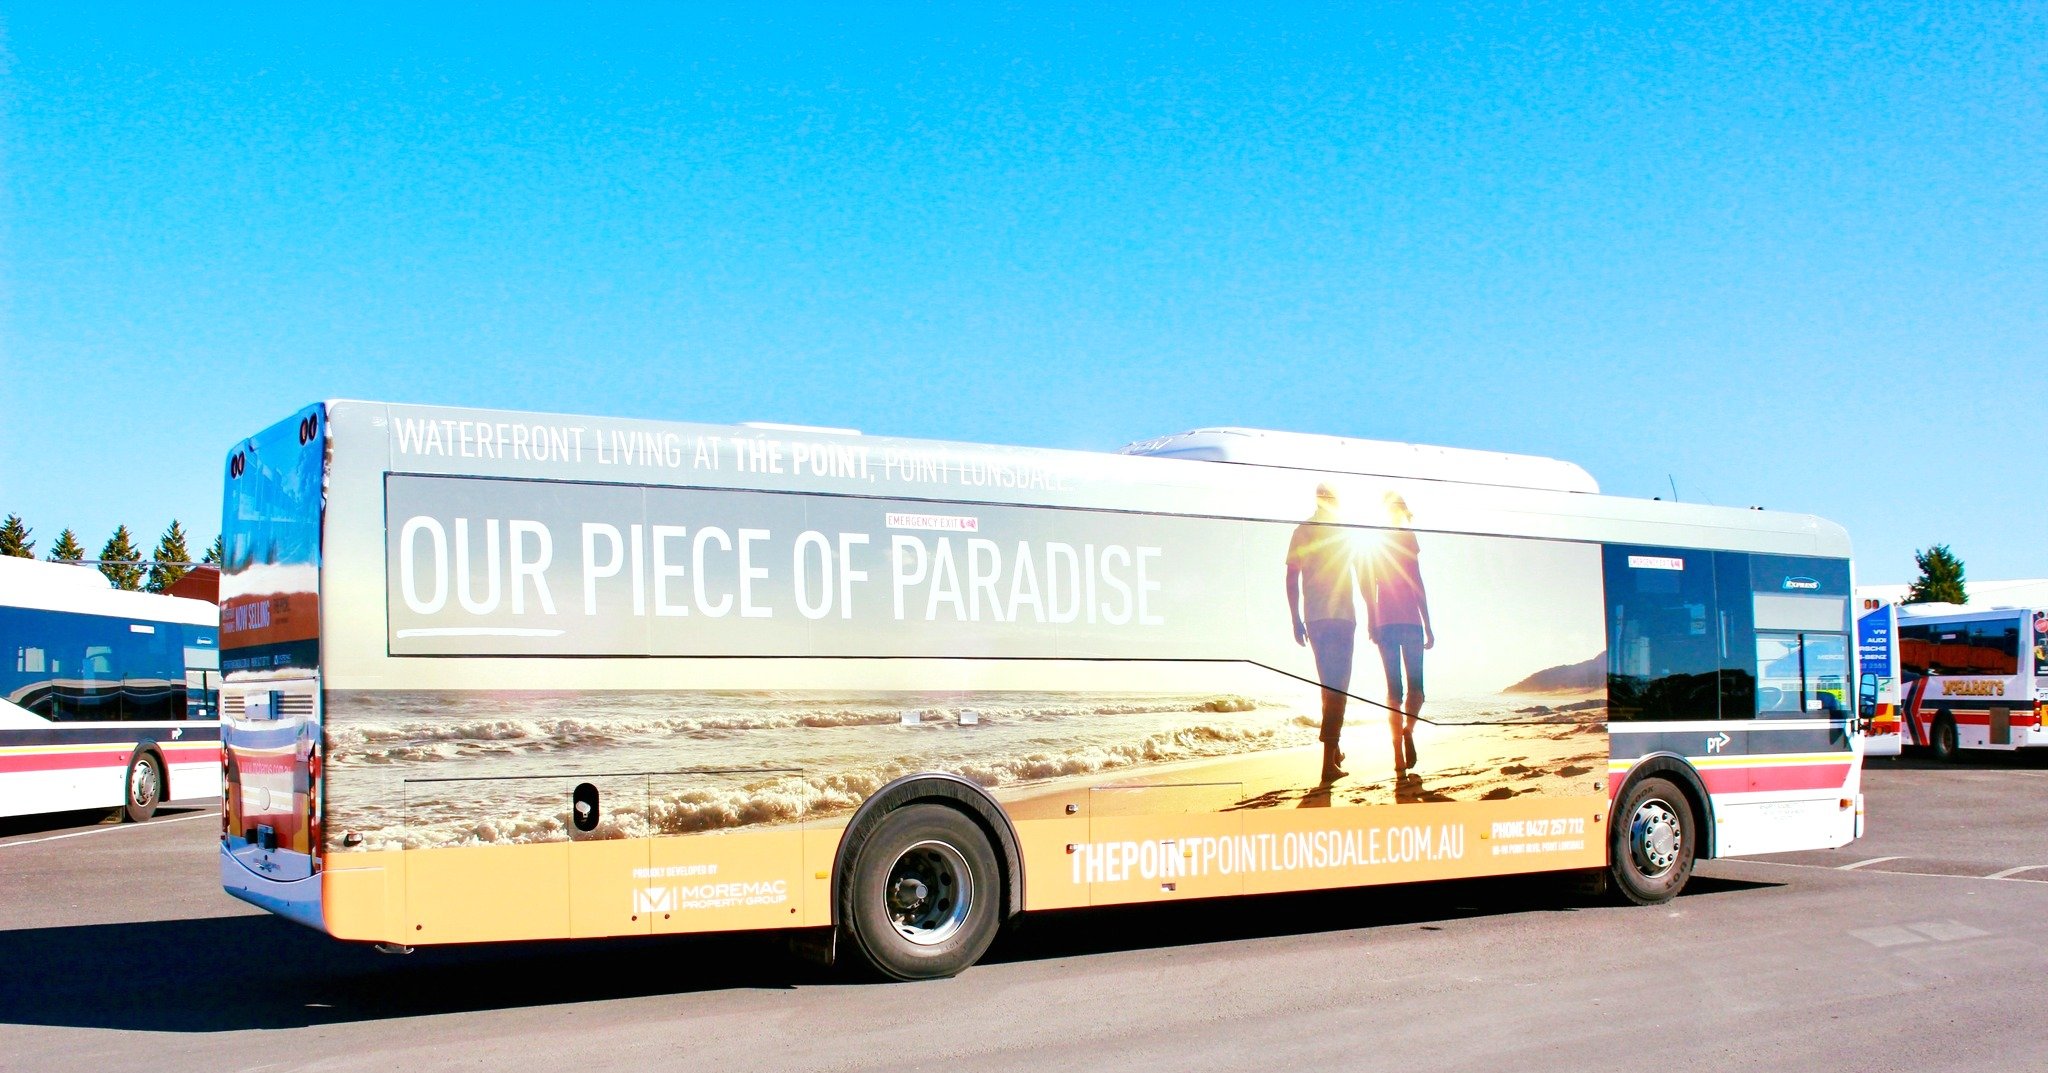 Get your point across like THE POINT bus wrap! A splash of vibrant colors cruising through the streets, bringing seaside vibes wherever it goes. Can't help but look at this coastal charm on wheels! 🚌🌊 

#PointLonsdalePride #CoastalVibes #BusWrapArt